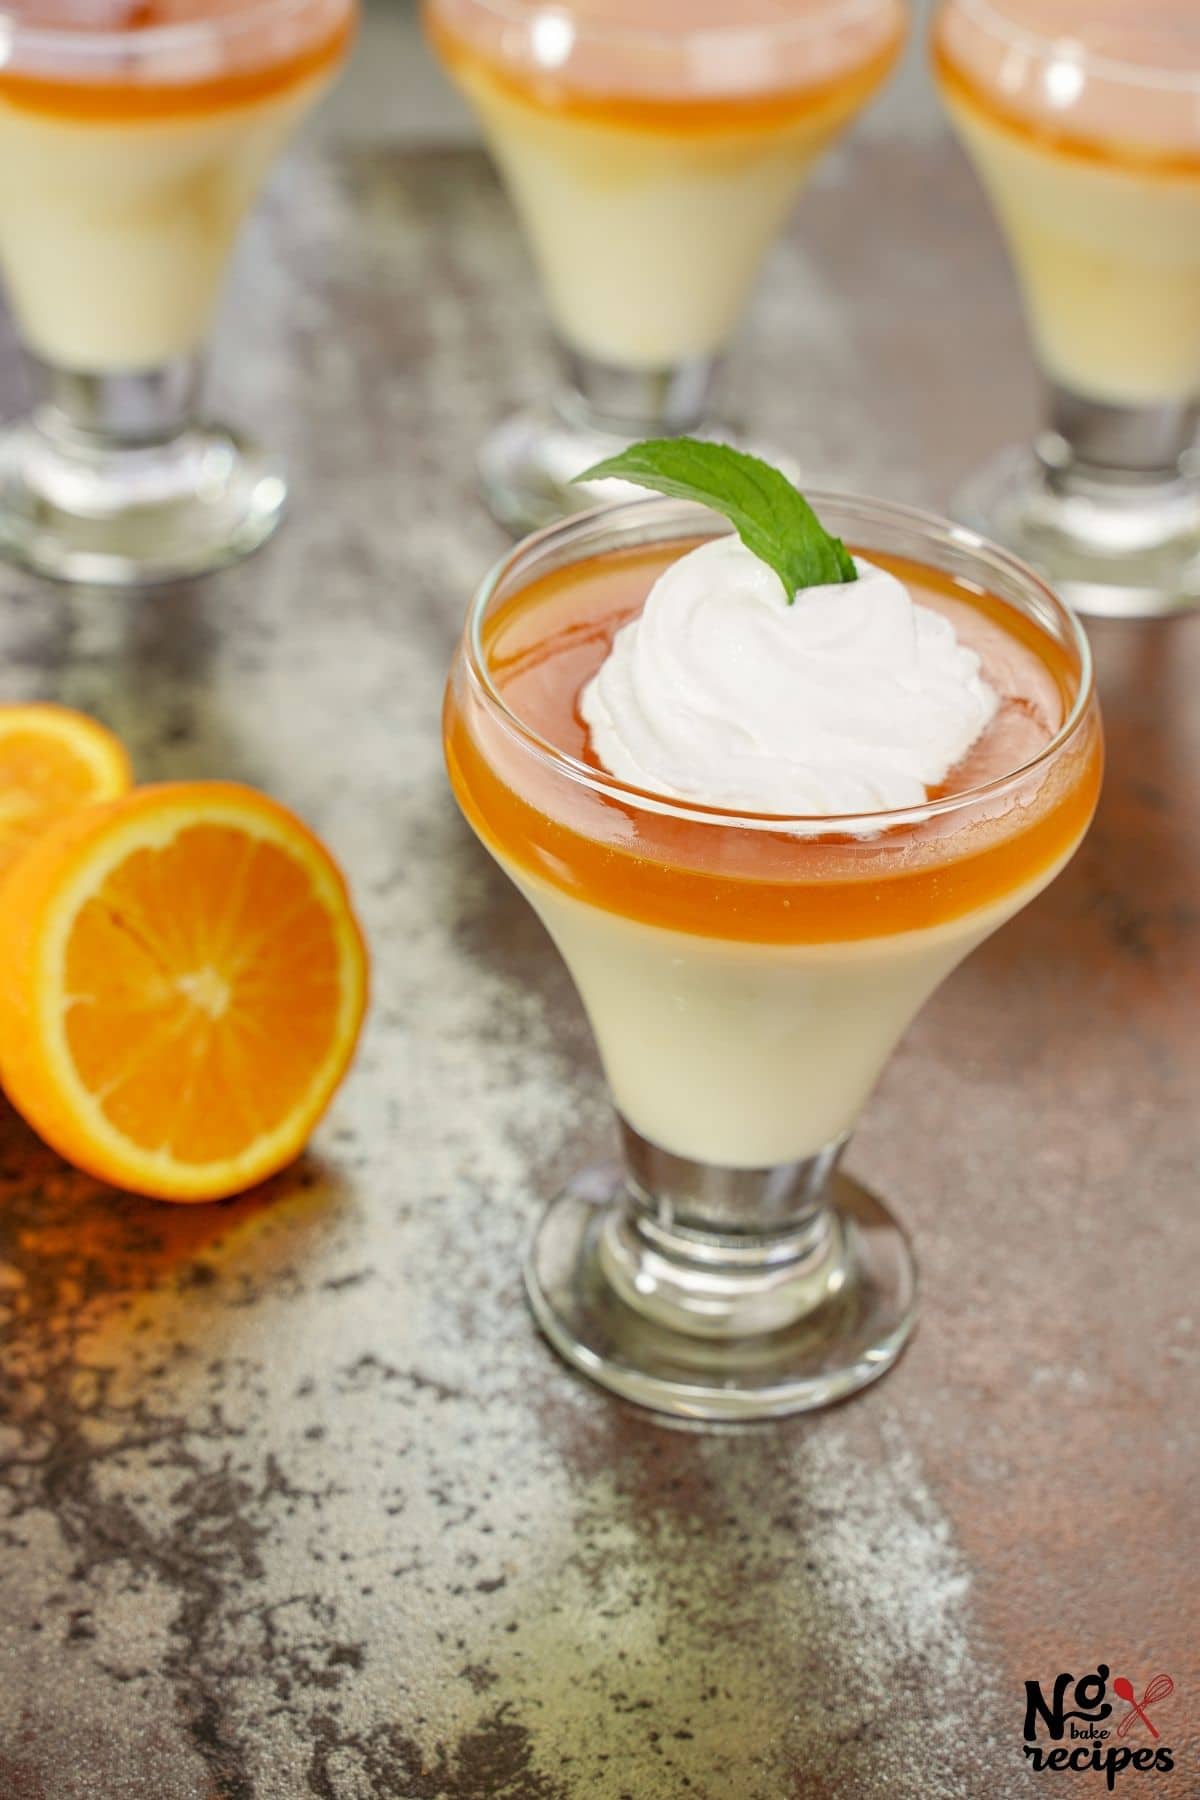 glasses of caramel pudding on brown table with orange slices